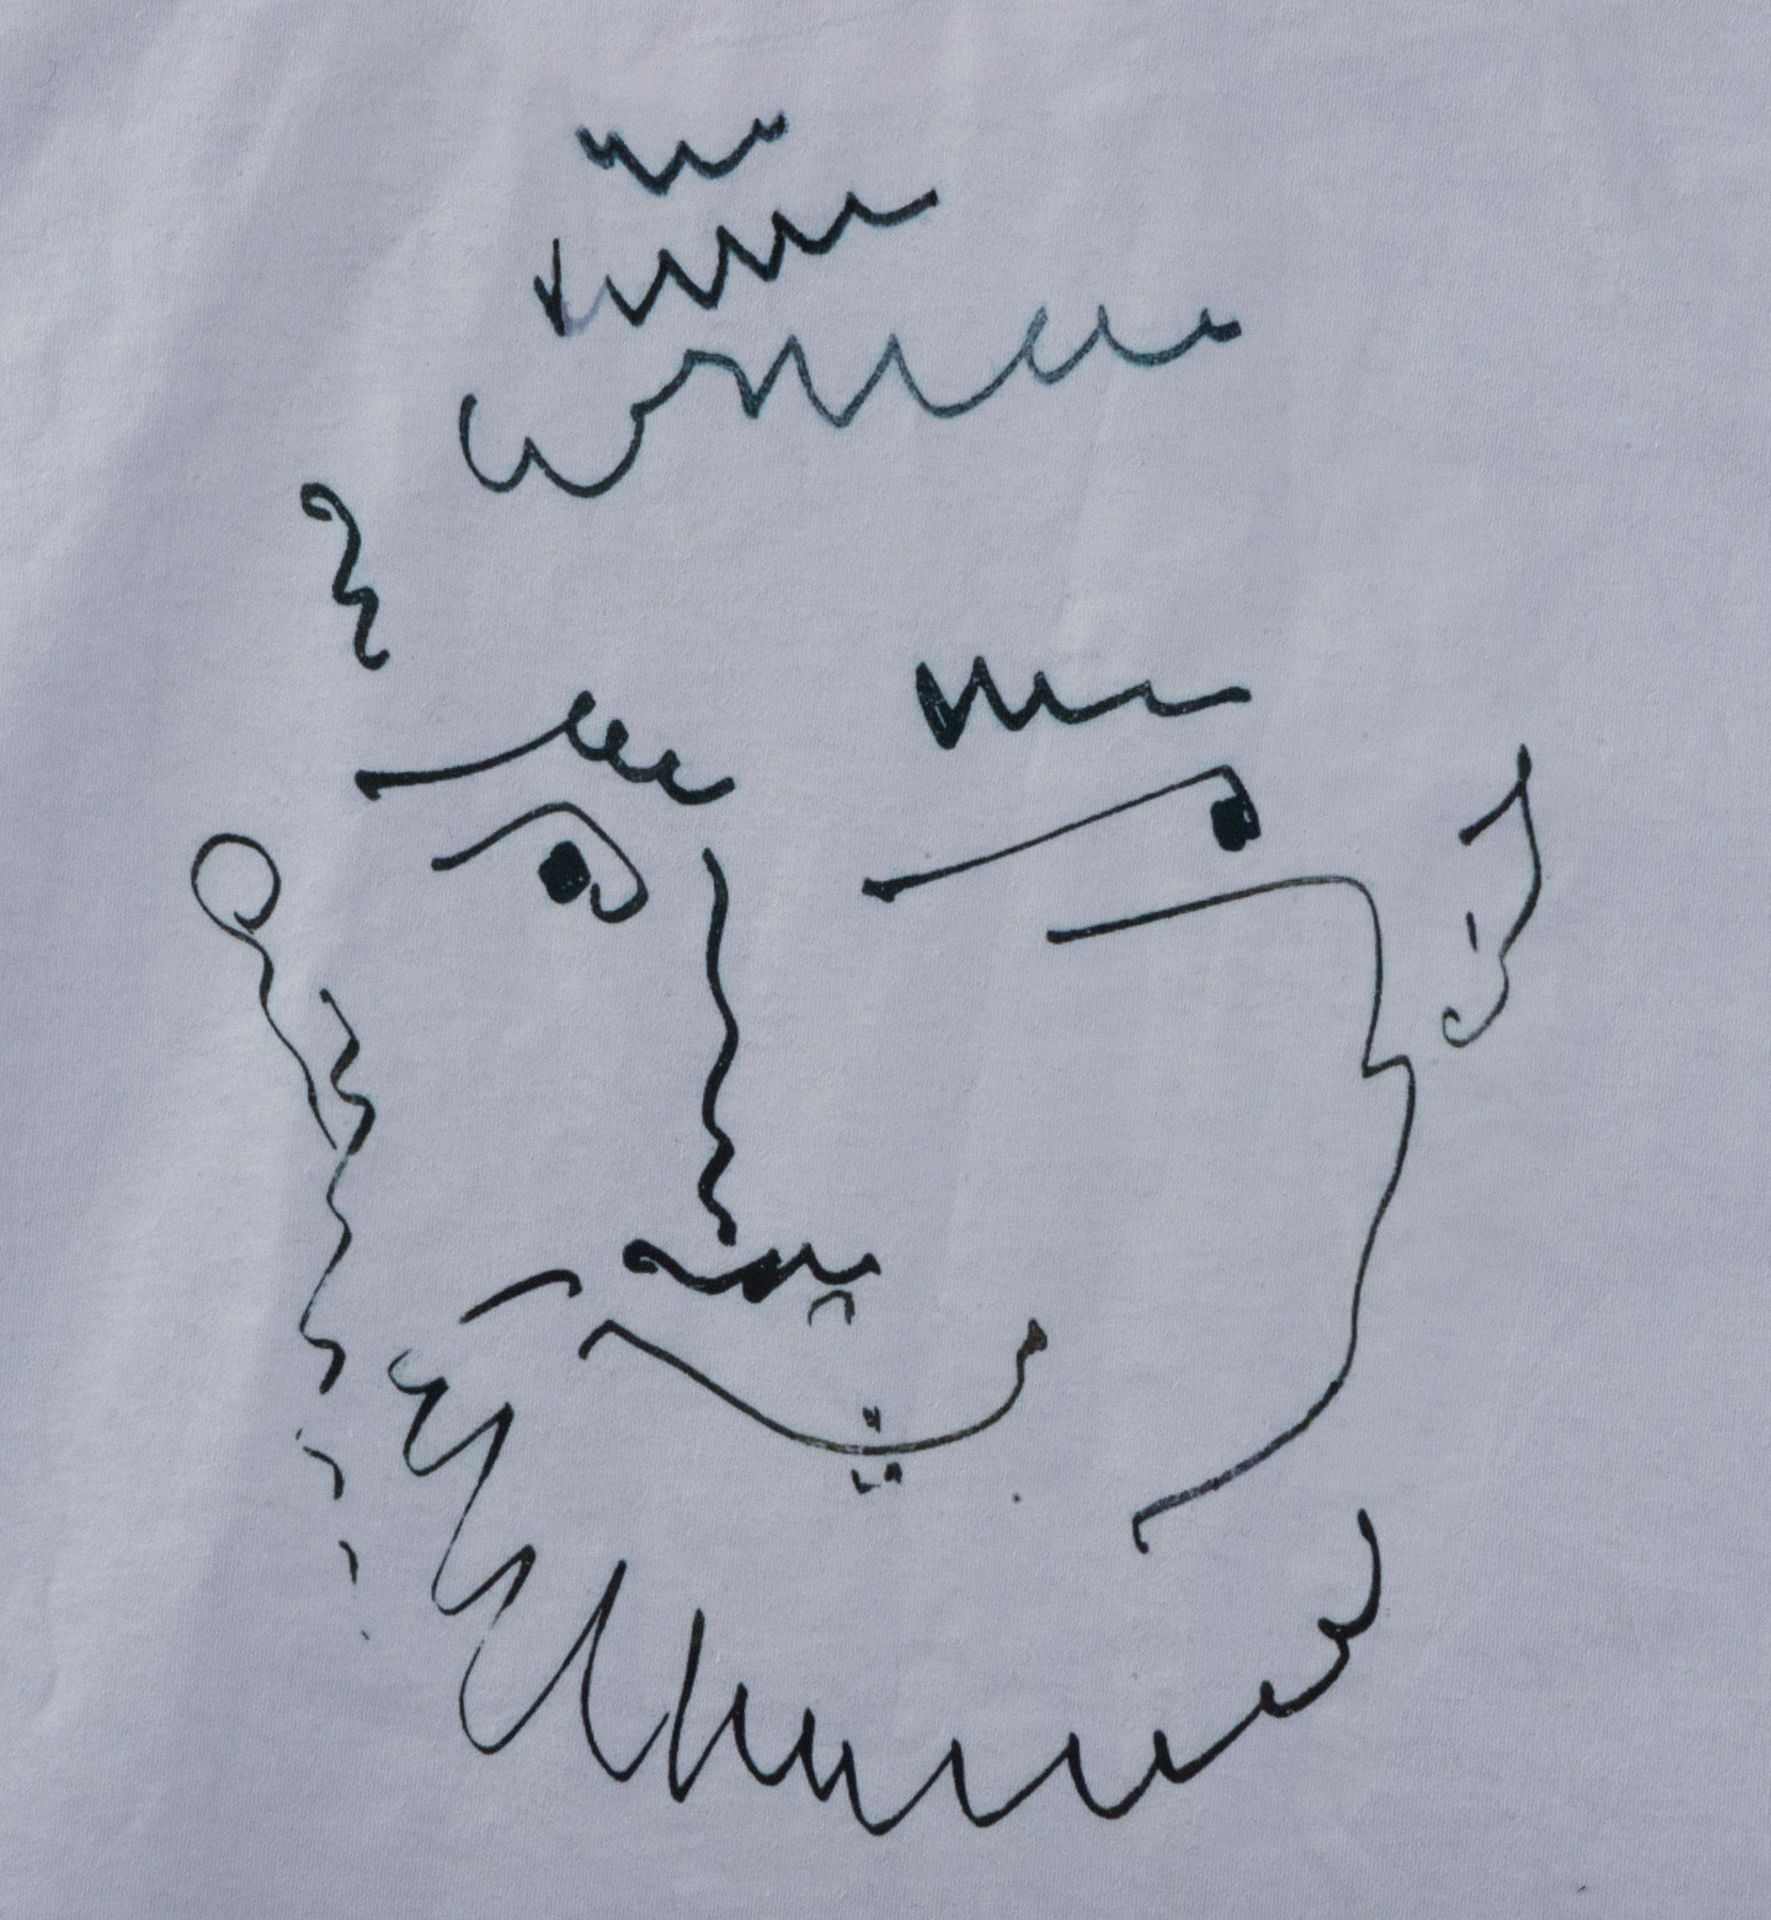 "Homage to Picasso", César deT-shirt inspired by the drawing of Bacchus by Picasso in the collection - Image 4 of 4